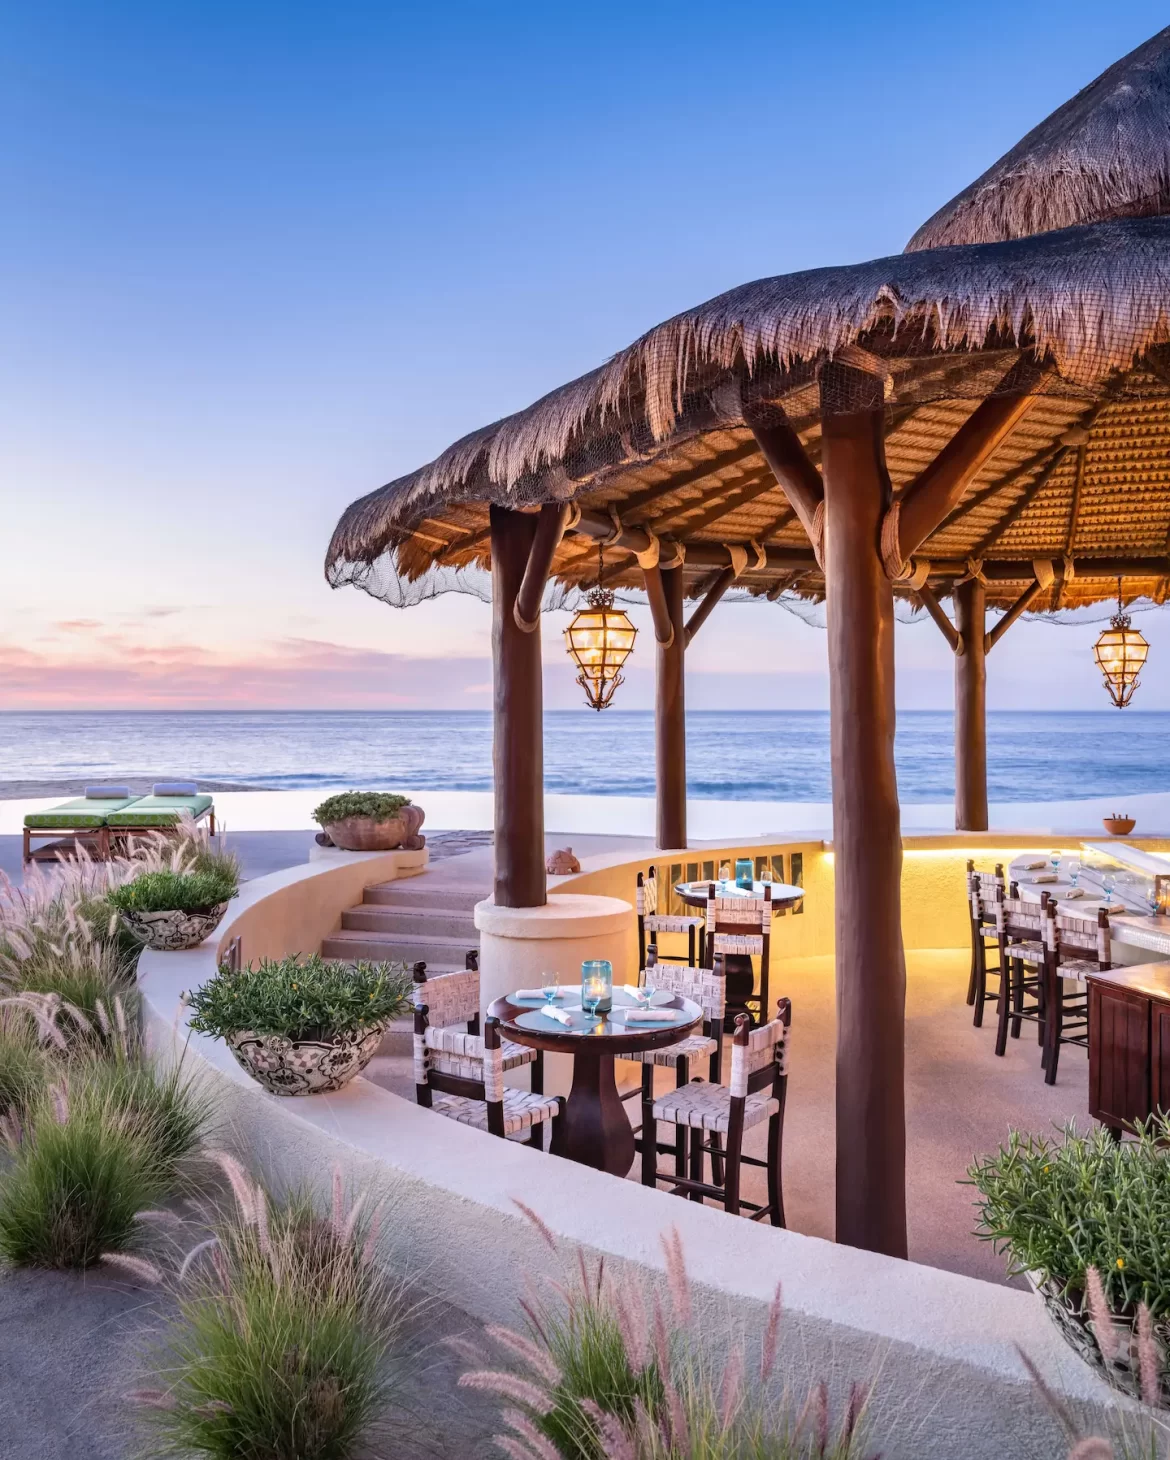 Make a reservation to discover Bagatelle restaurant in Los Cabos